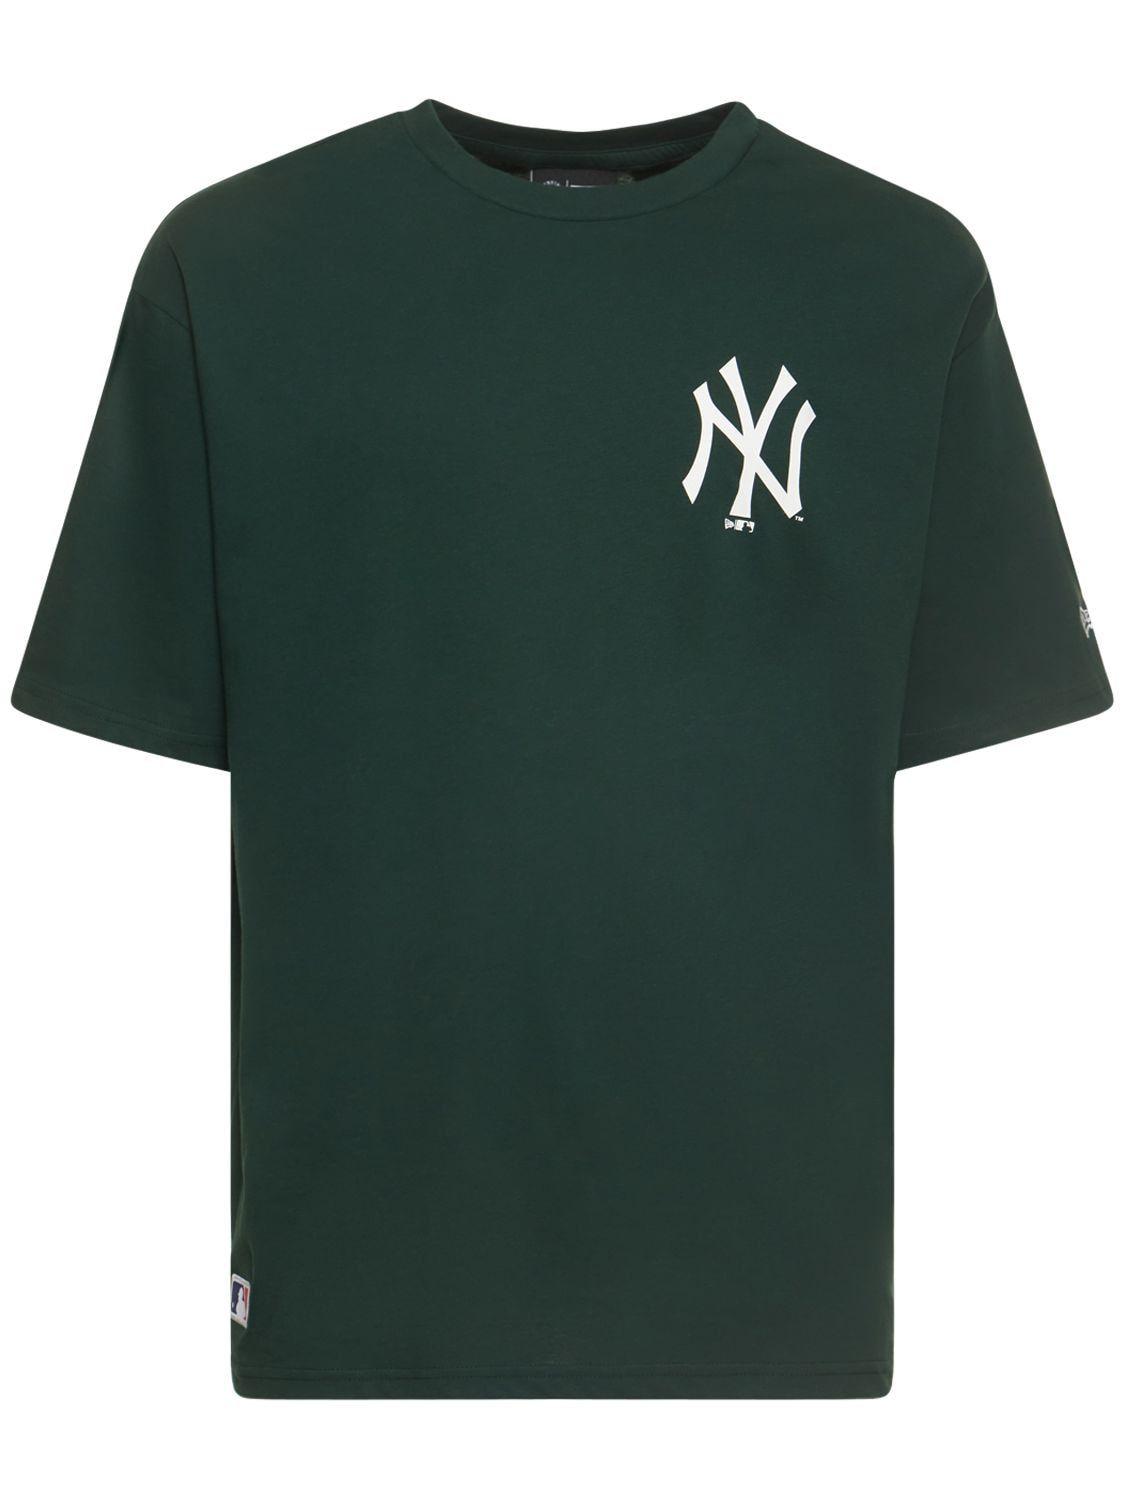 KTZ Ny Yankees Essential T-shirt in Green for Men